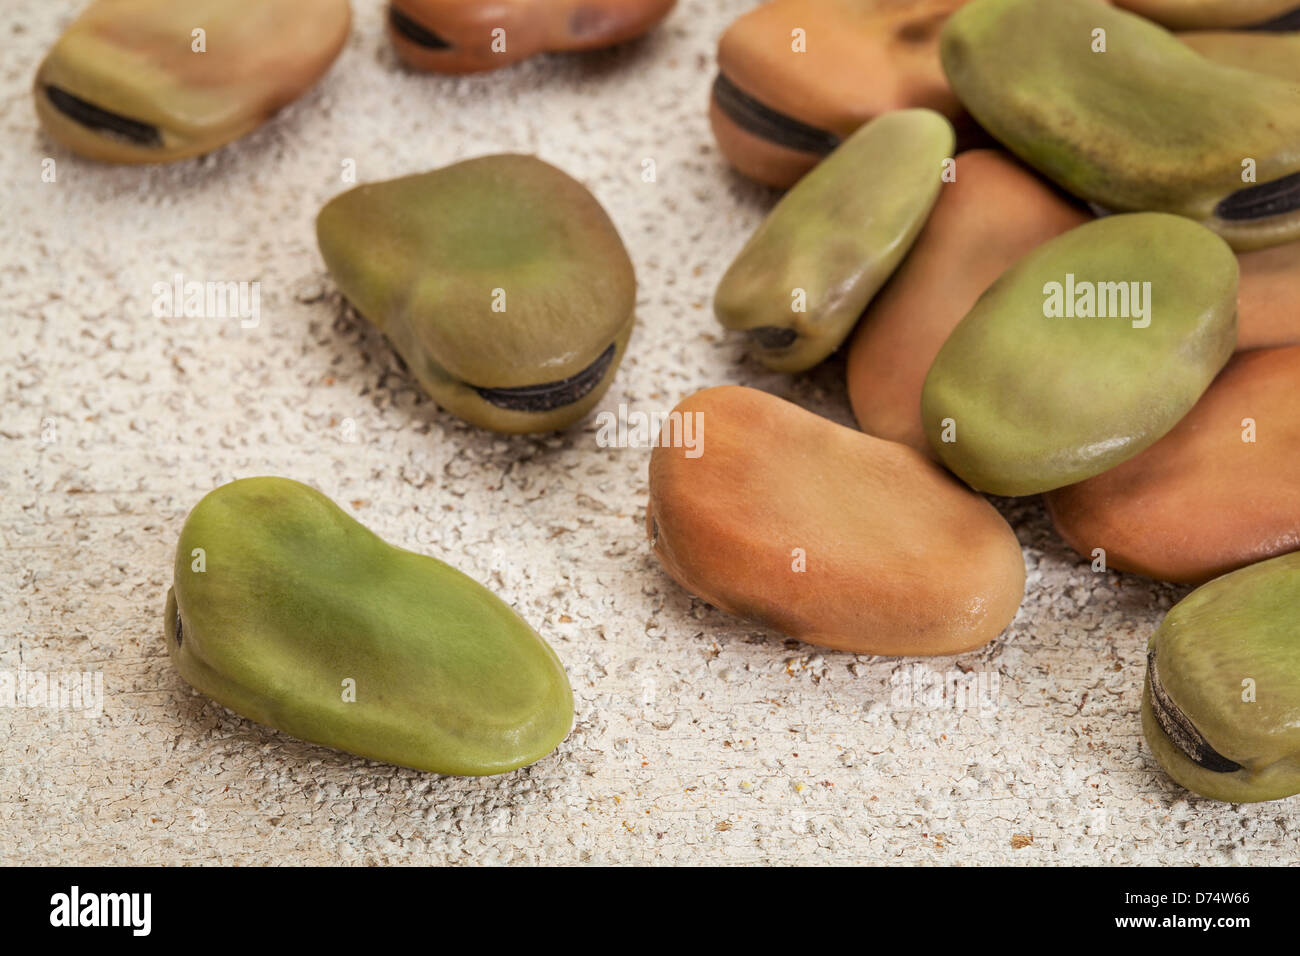 fava (broad) beans against a rough white painted band wood Stock Photo